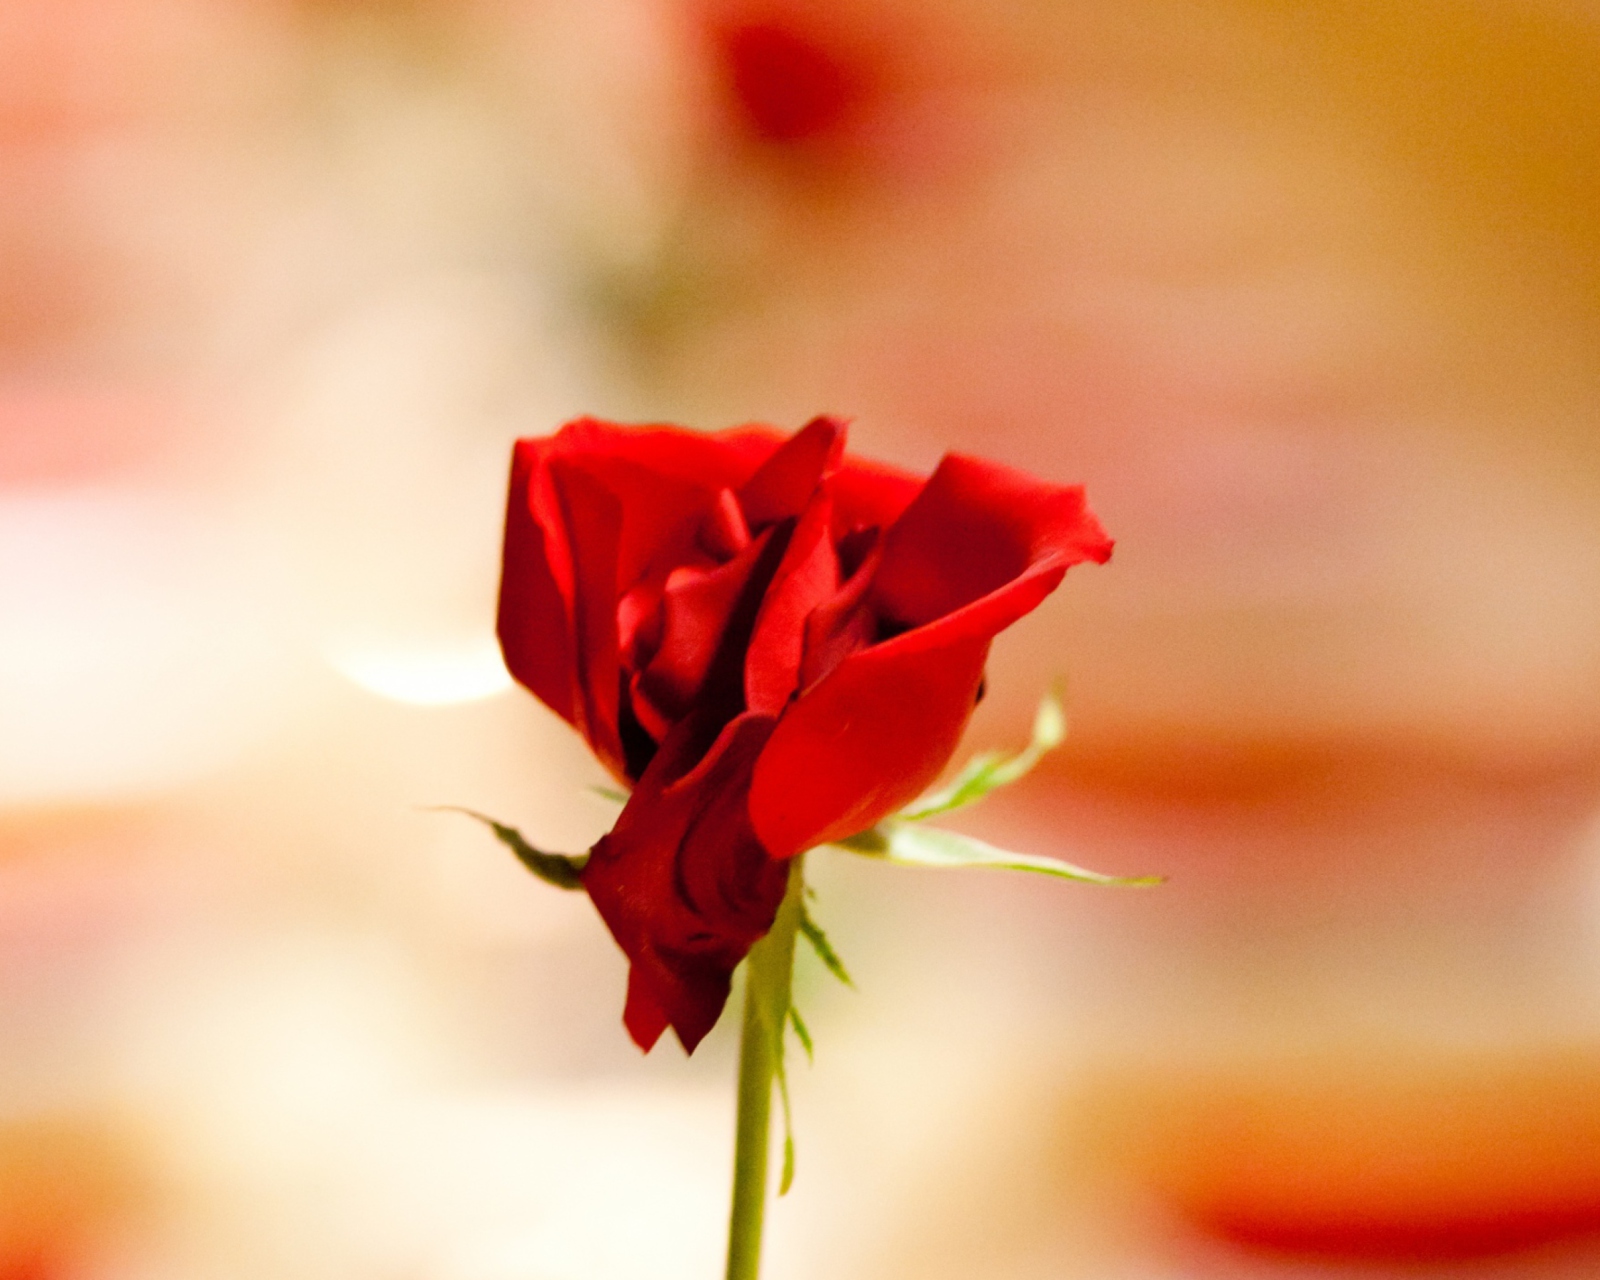 One Red Rose For You wallpaper 1600x1280